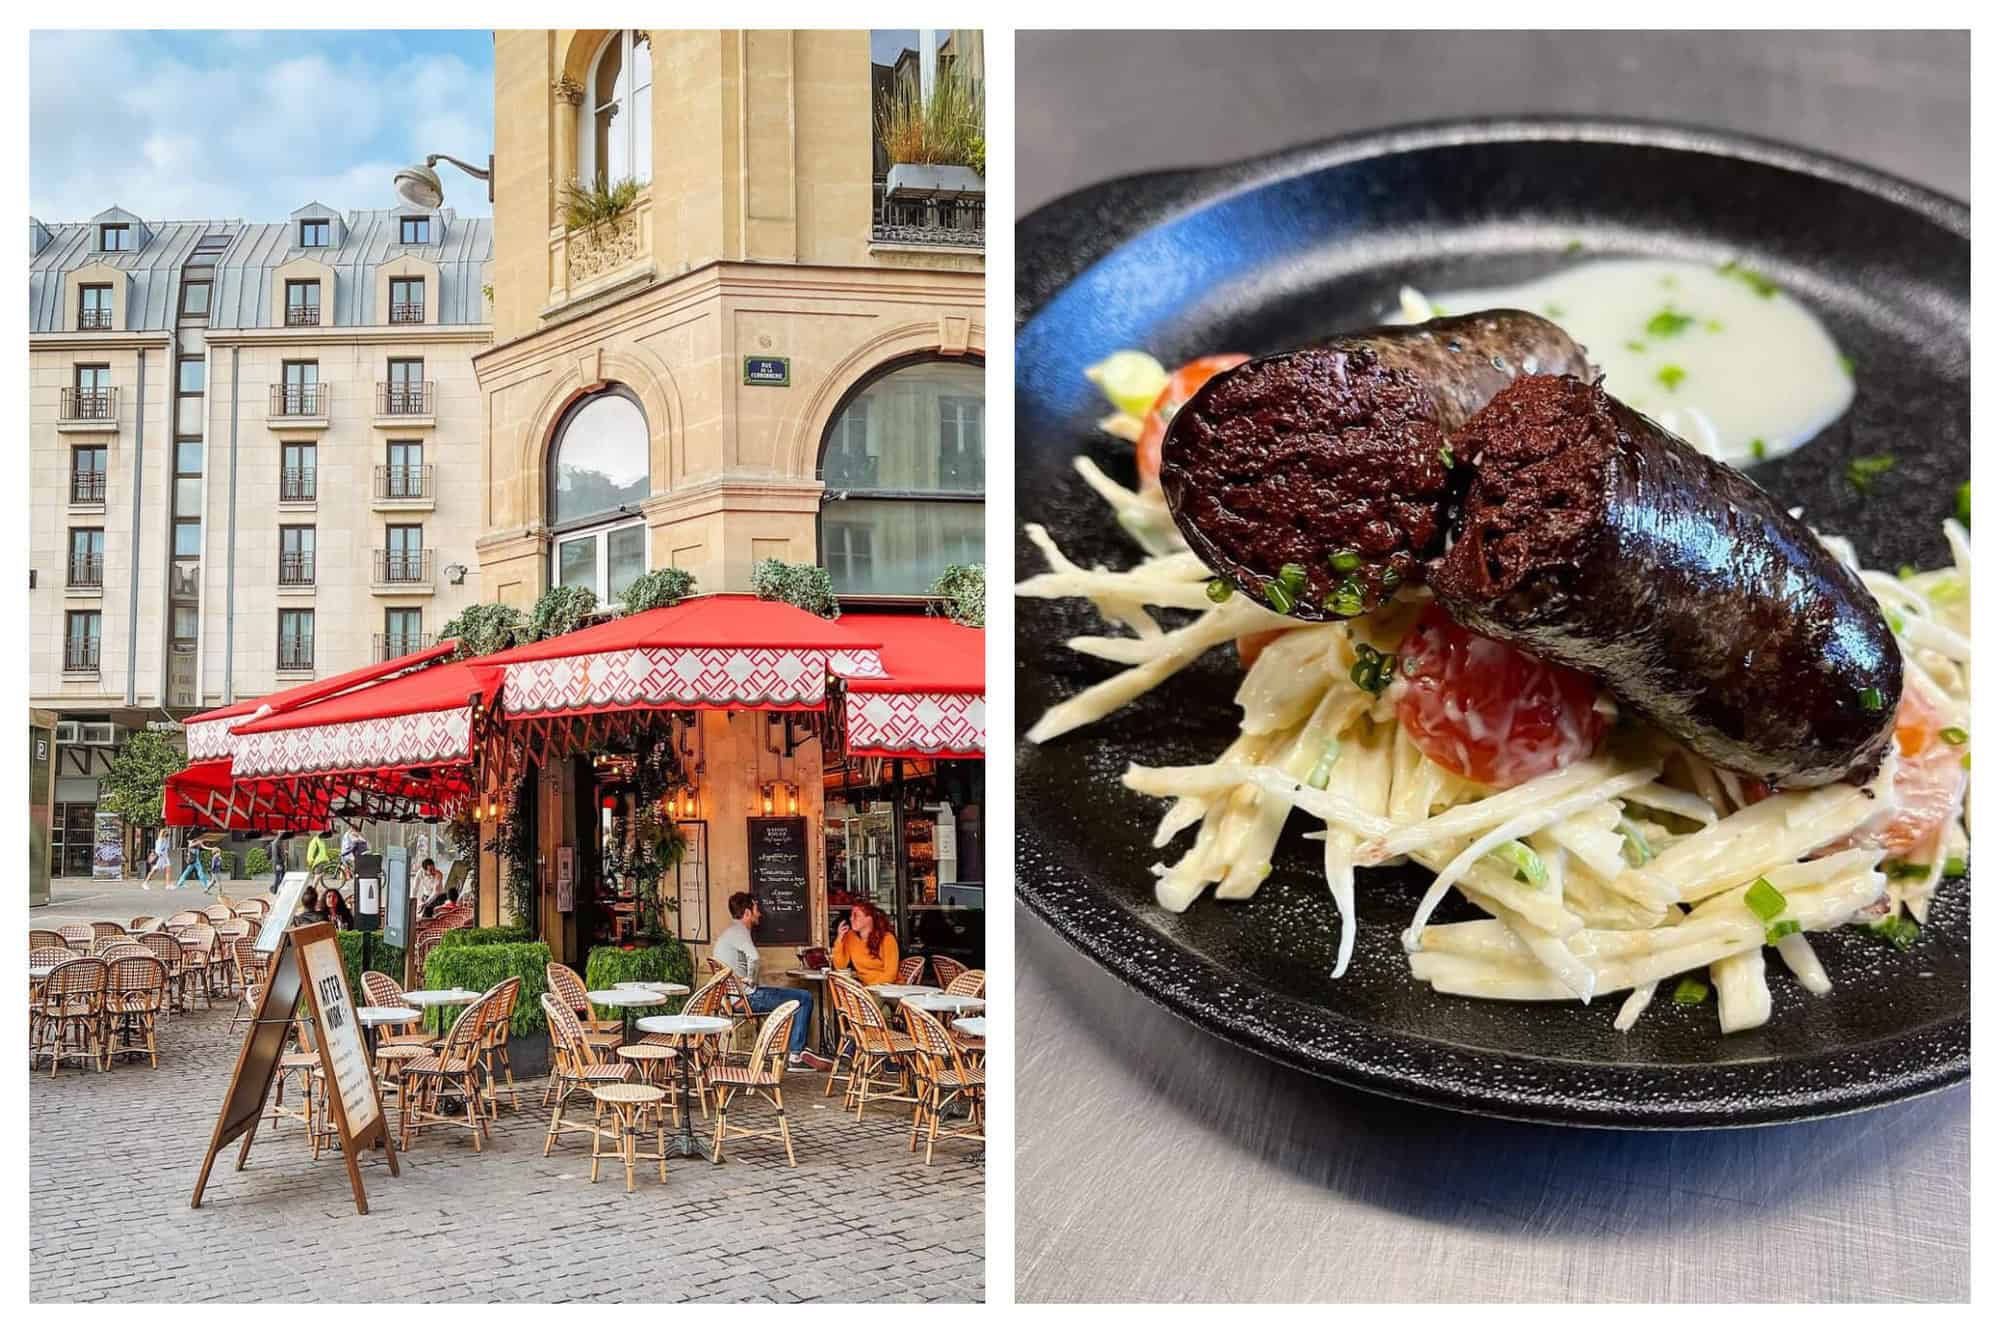 Left: a photo of a corner terrace in Paris with red roofing and empty tables below. Right: a photo of the french dish boudin noir on a black plate with a salad